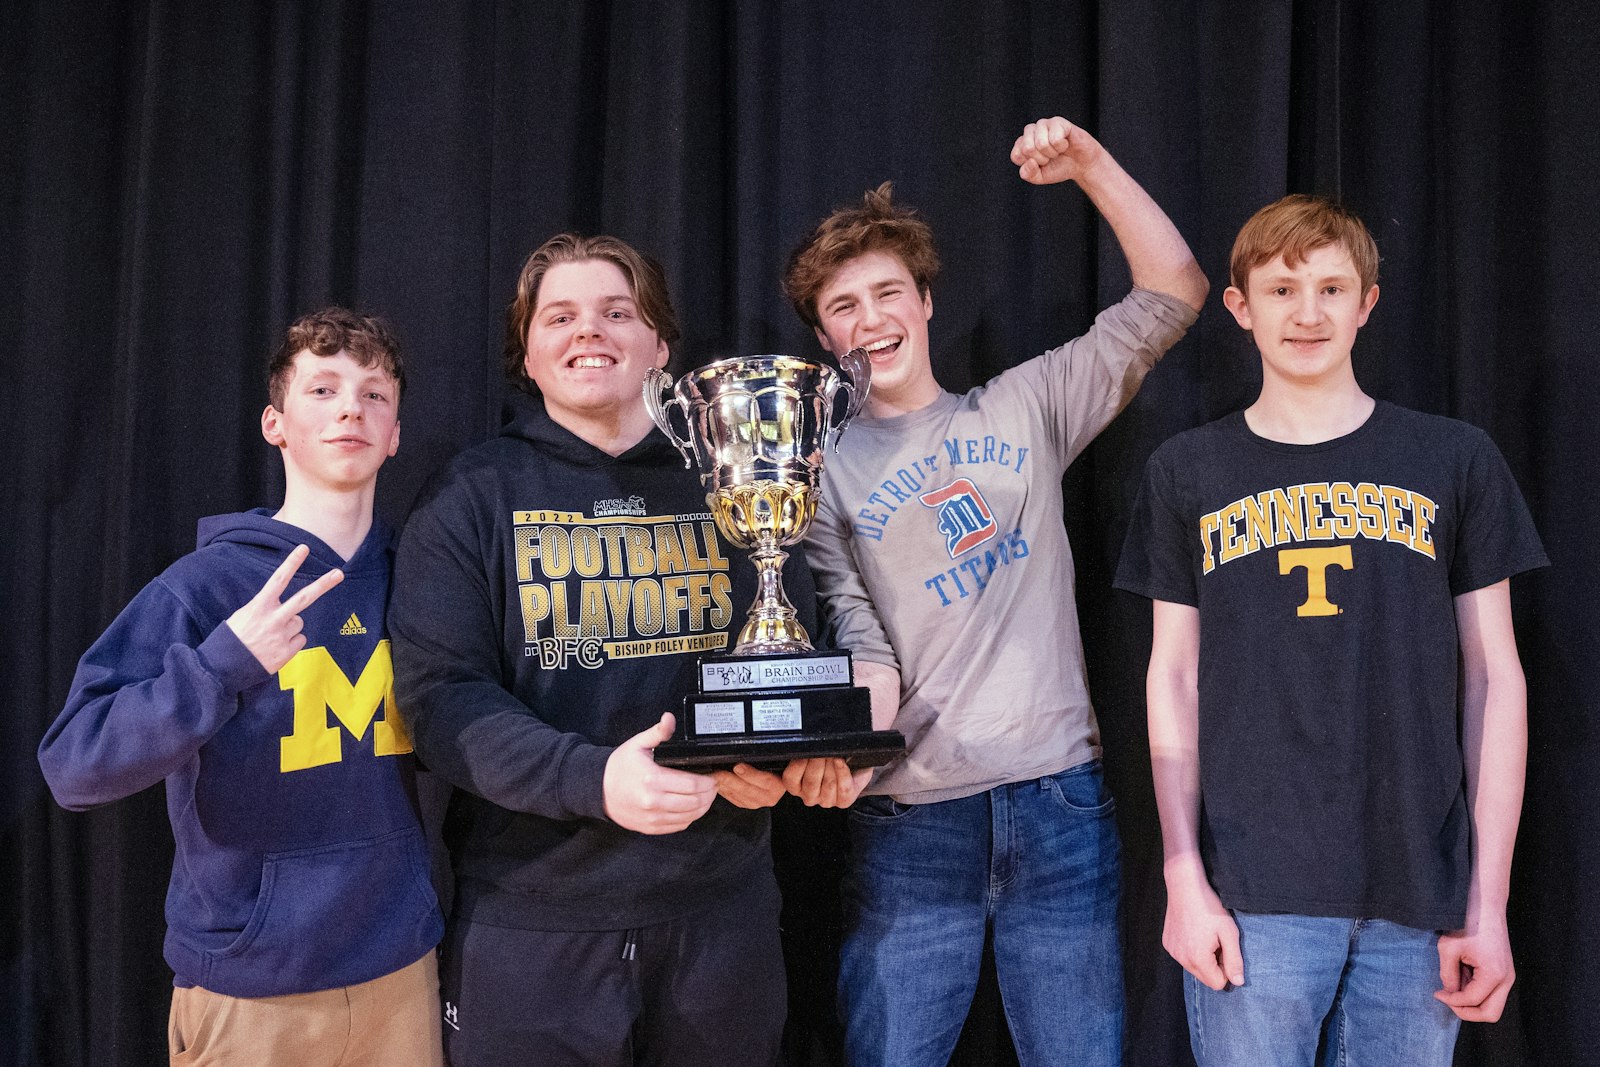 The teams are made up of four students each, with one representative from each grade. From left to right, the winning team included Andrew Bishop ('27), Andrew Glaza ('25), team captain Bennett Arakelian ('24), and Andrew Tanner ('26).